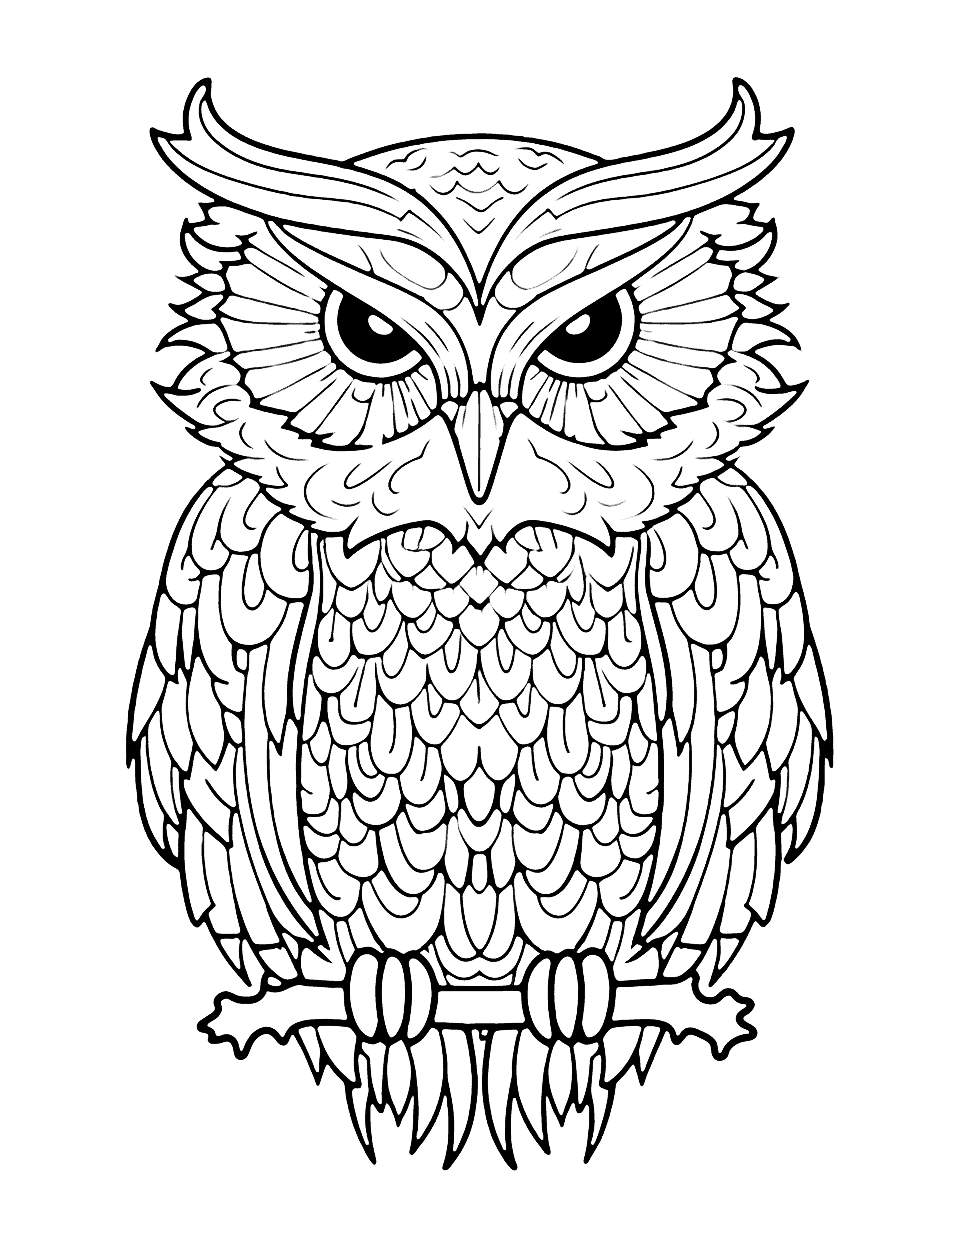 Difficult Owl Animal Coloring Page - A highly detailed and intricate owl design with complex patterns.